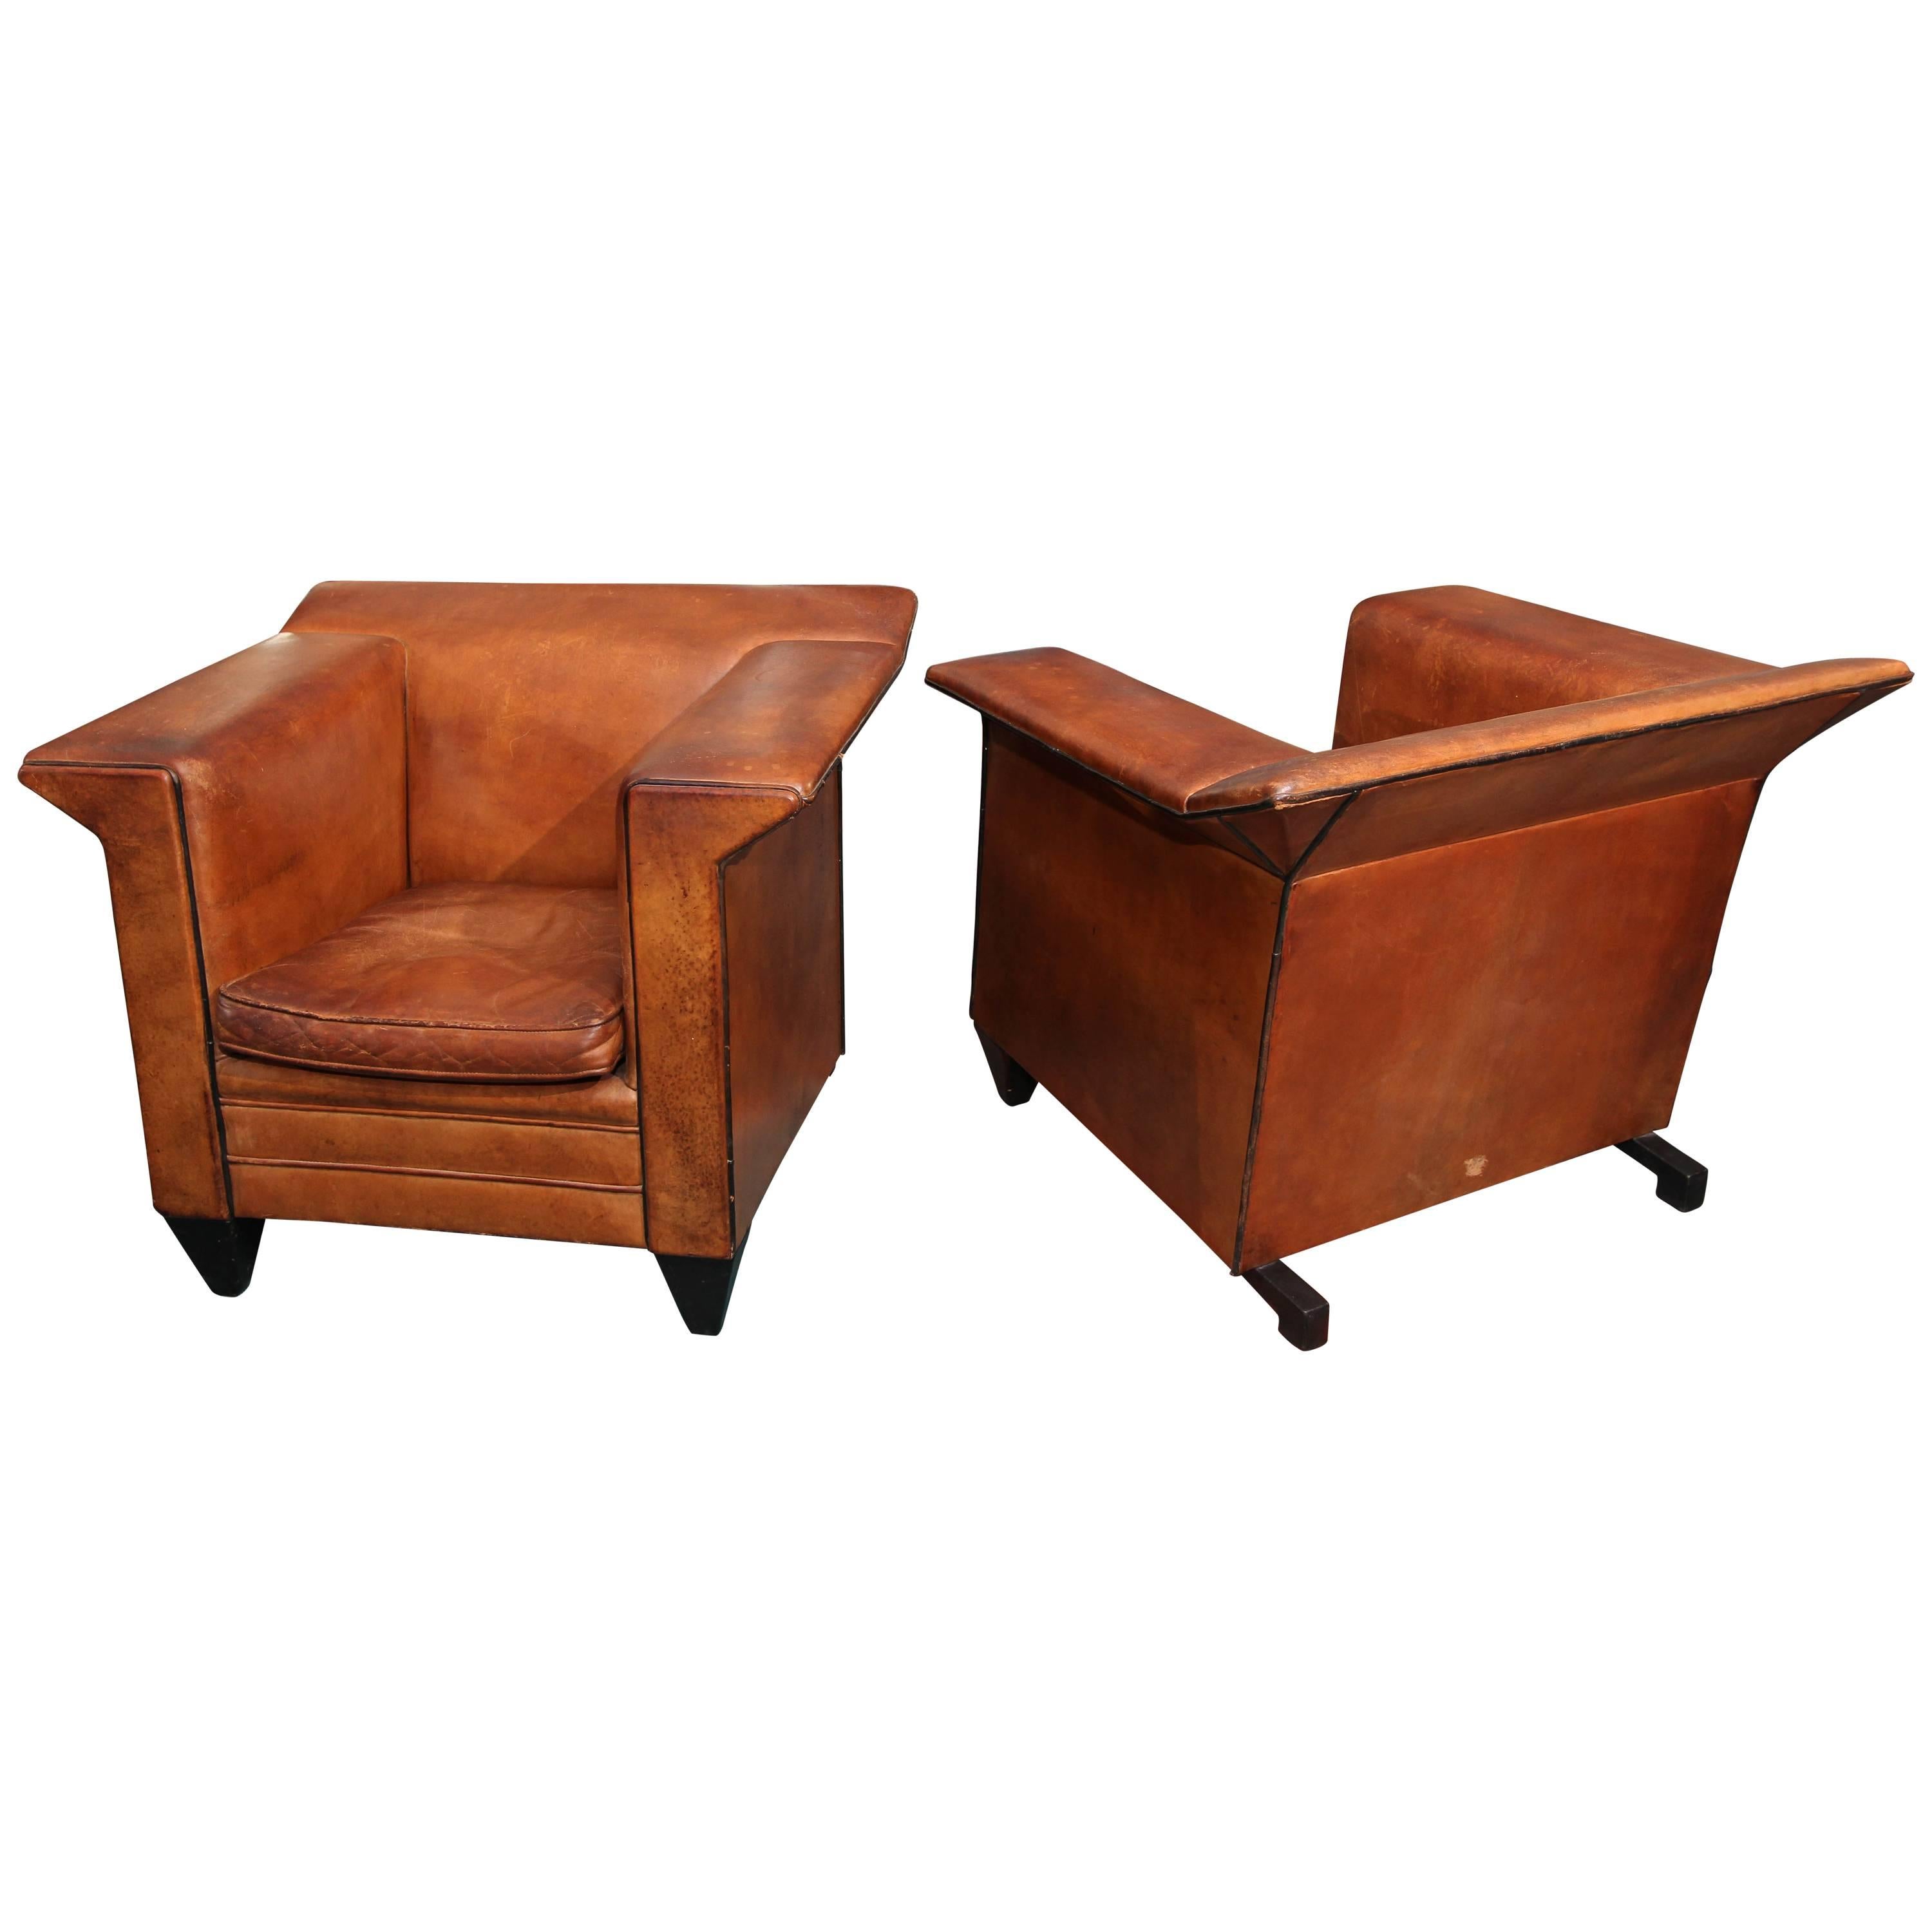 Pair of European Art Deco Even-Arm Club Chairs in Caramel Leather